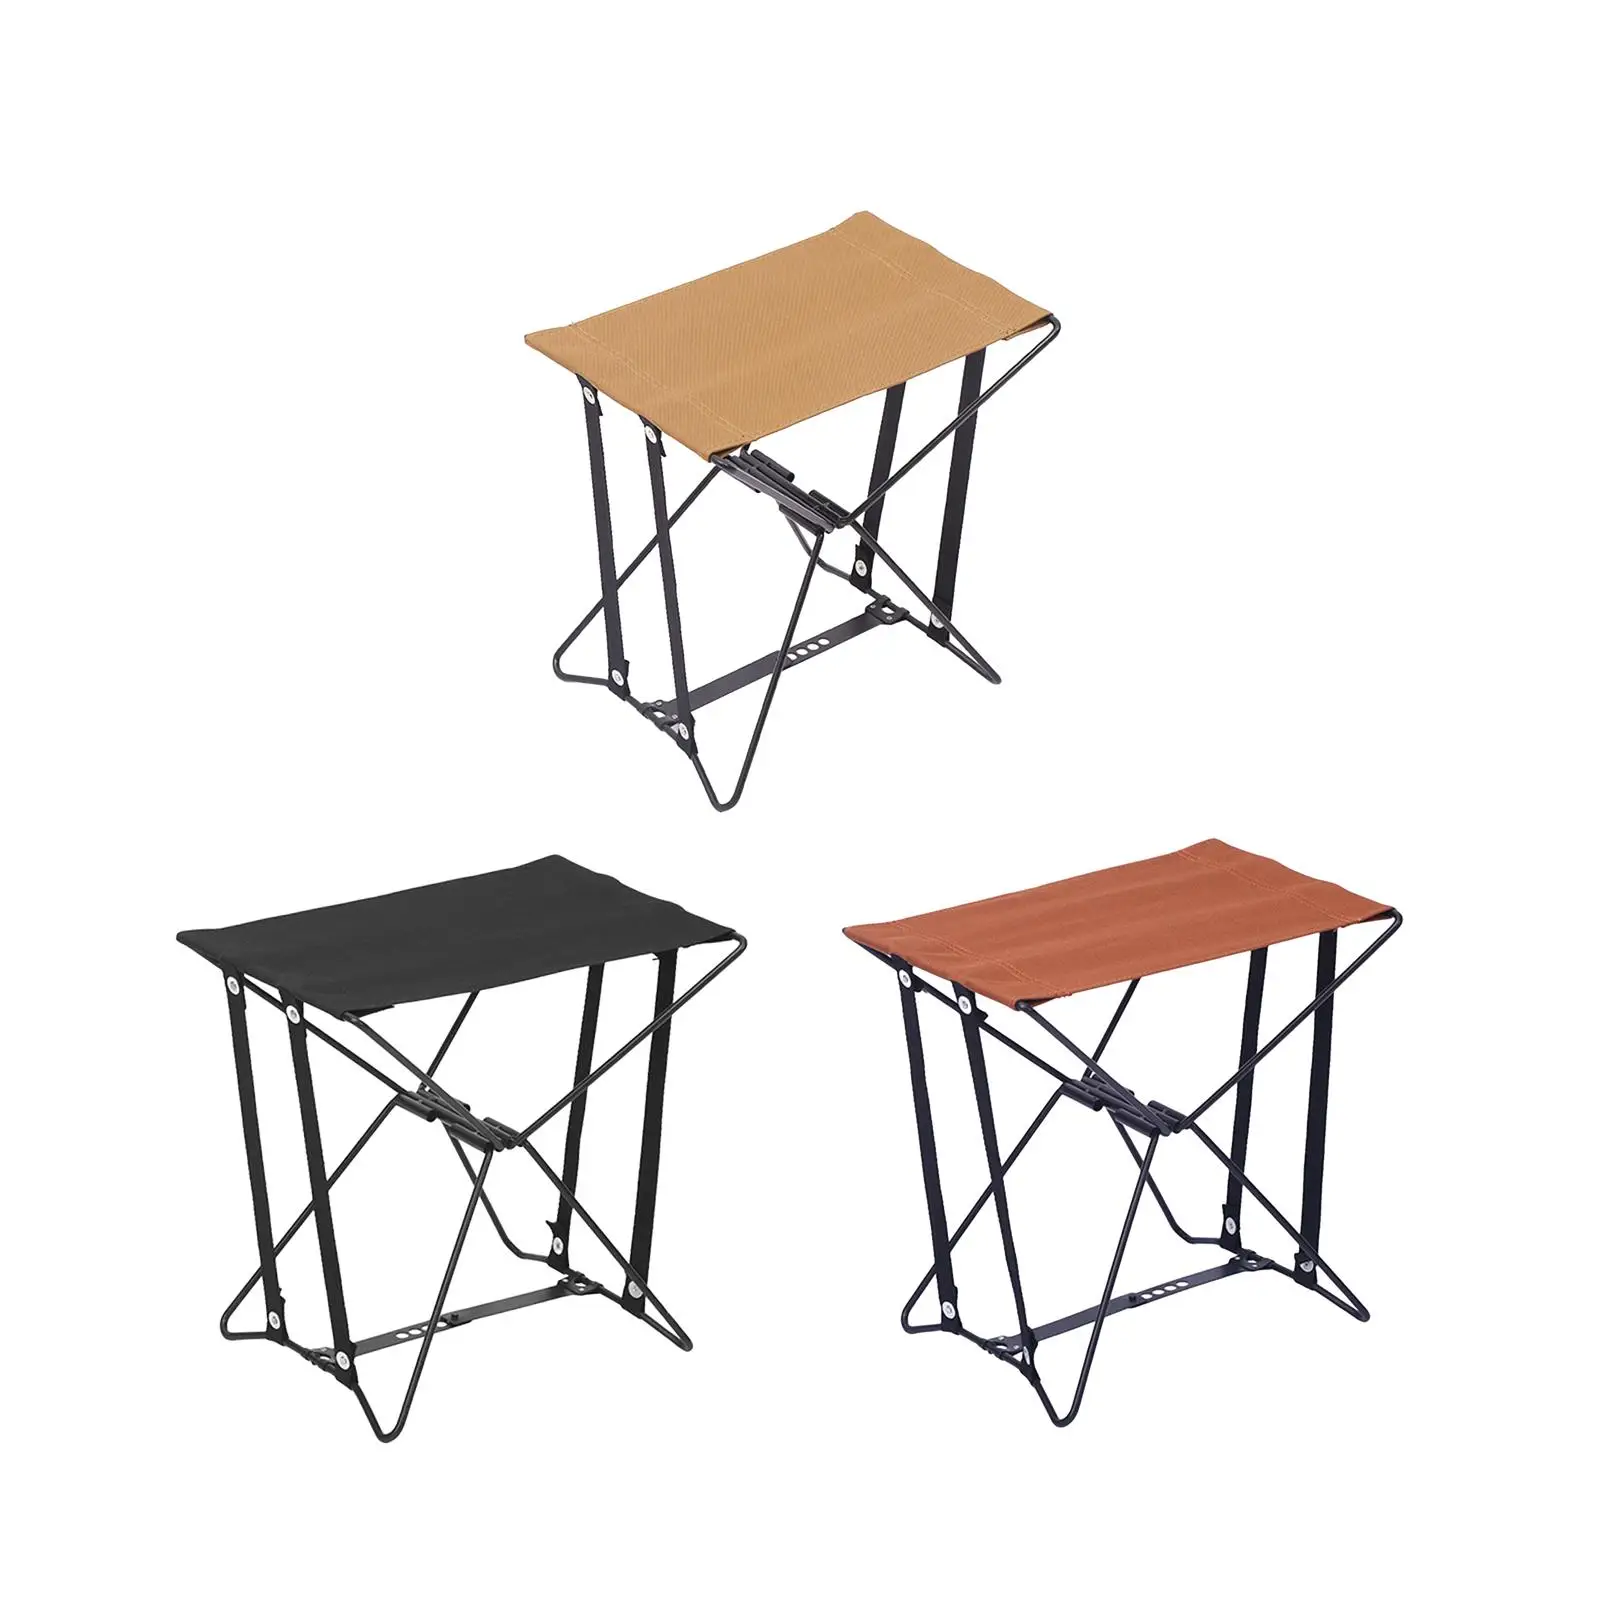 Camping Stool Portable Folding Stool under Desk Footstool Compact Saddle Chair Foldable Footstool for BBQ Garden Concert Lawn